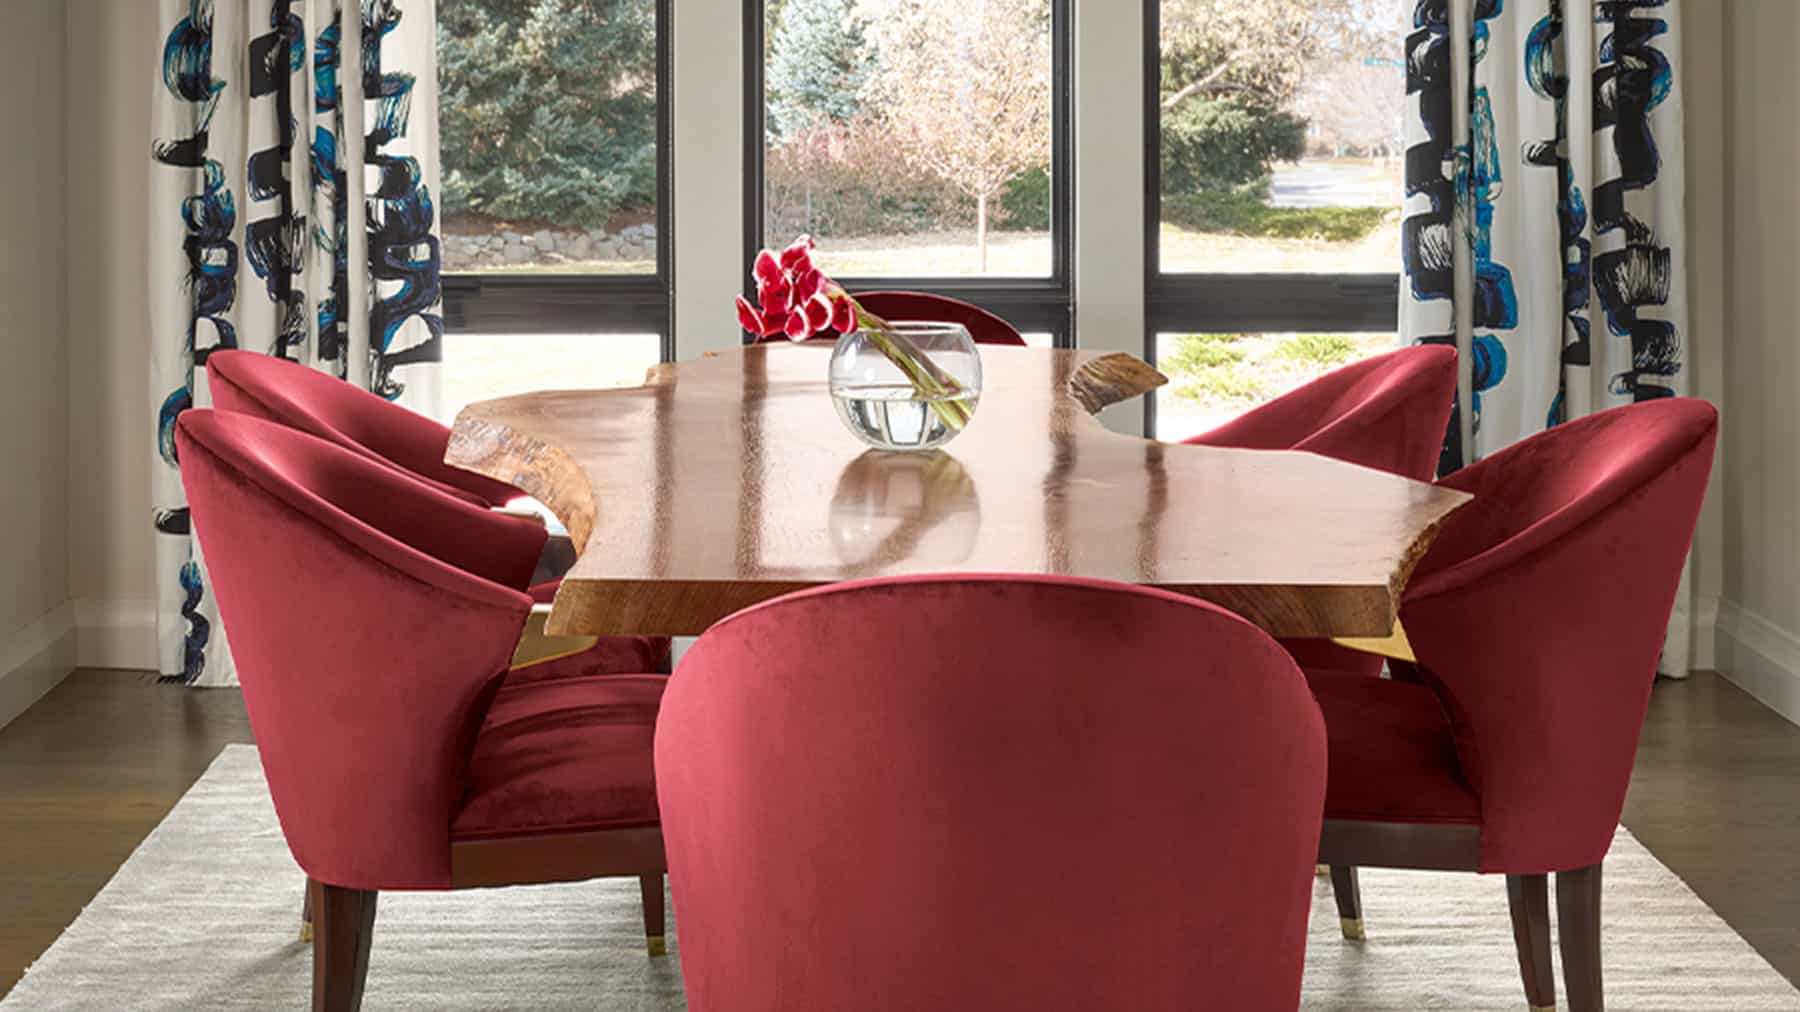 SOUTH FOREST LANE Dining Room__Duet Design Group_How To Design with Saturated Color_Featured